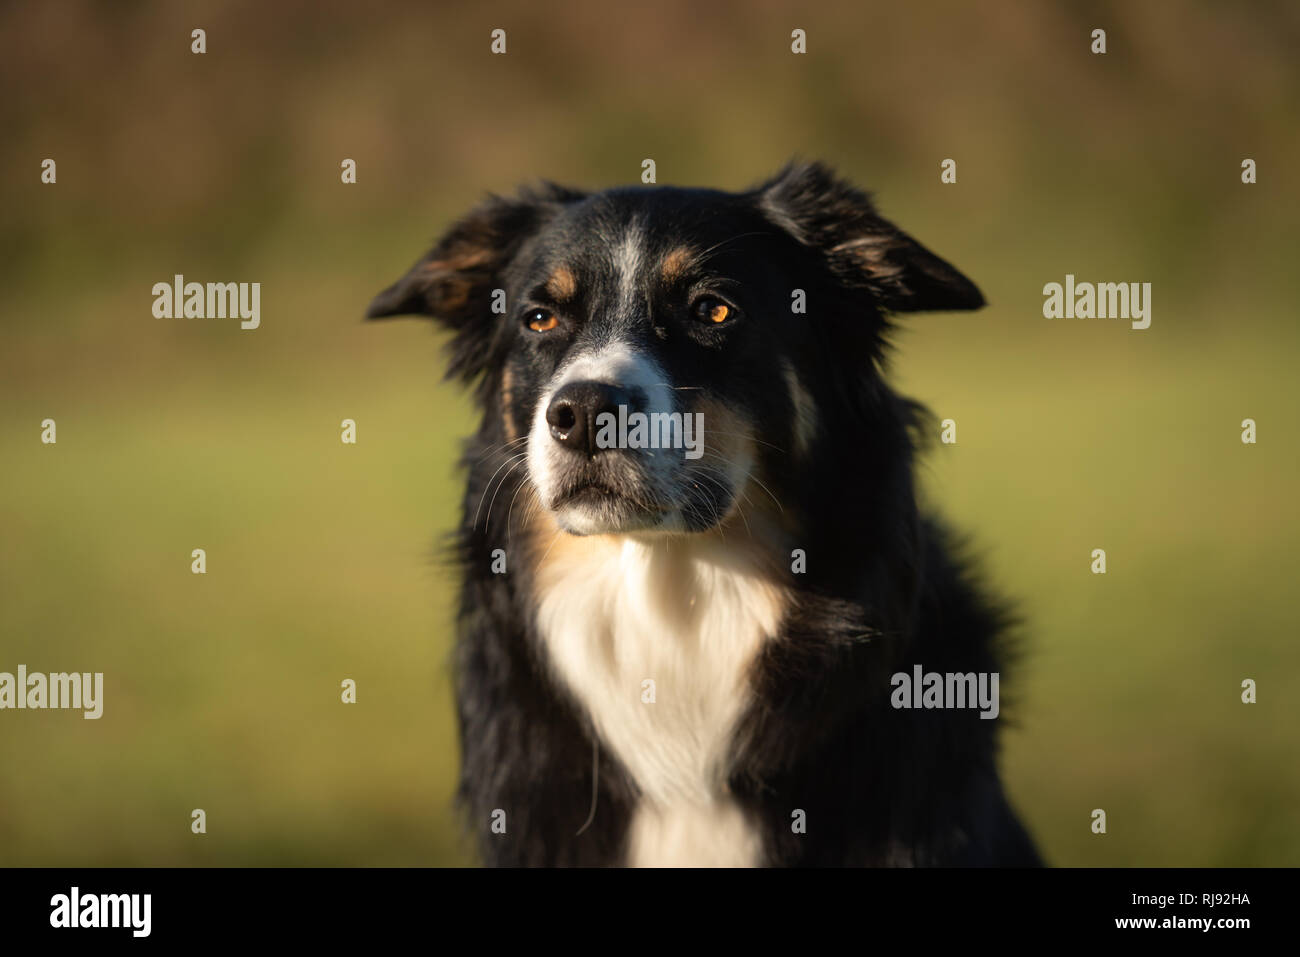 Border Collie dog portrait. Cute dog is looking forwards. Hound is sitting in front of green background Stock Photo